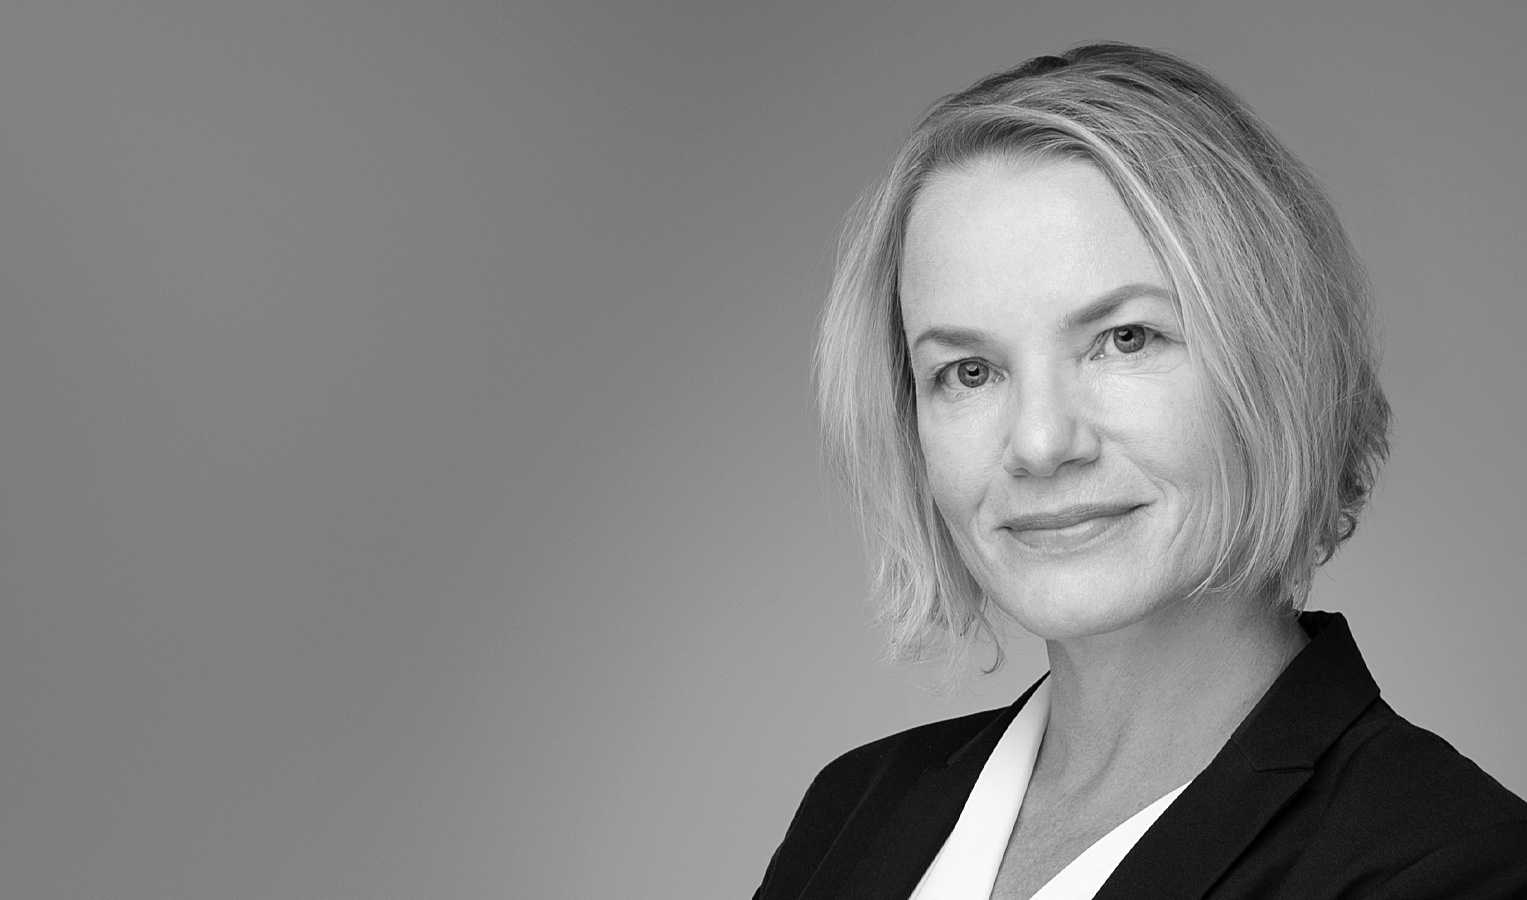 Sandpiper Promotes Kim Spear to Deputy General Manager of its Hong Kong Office